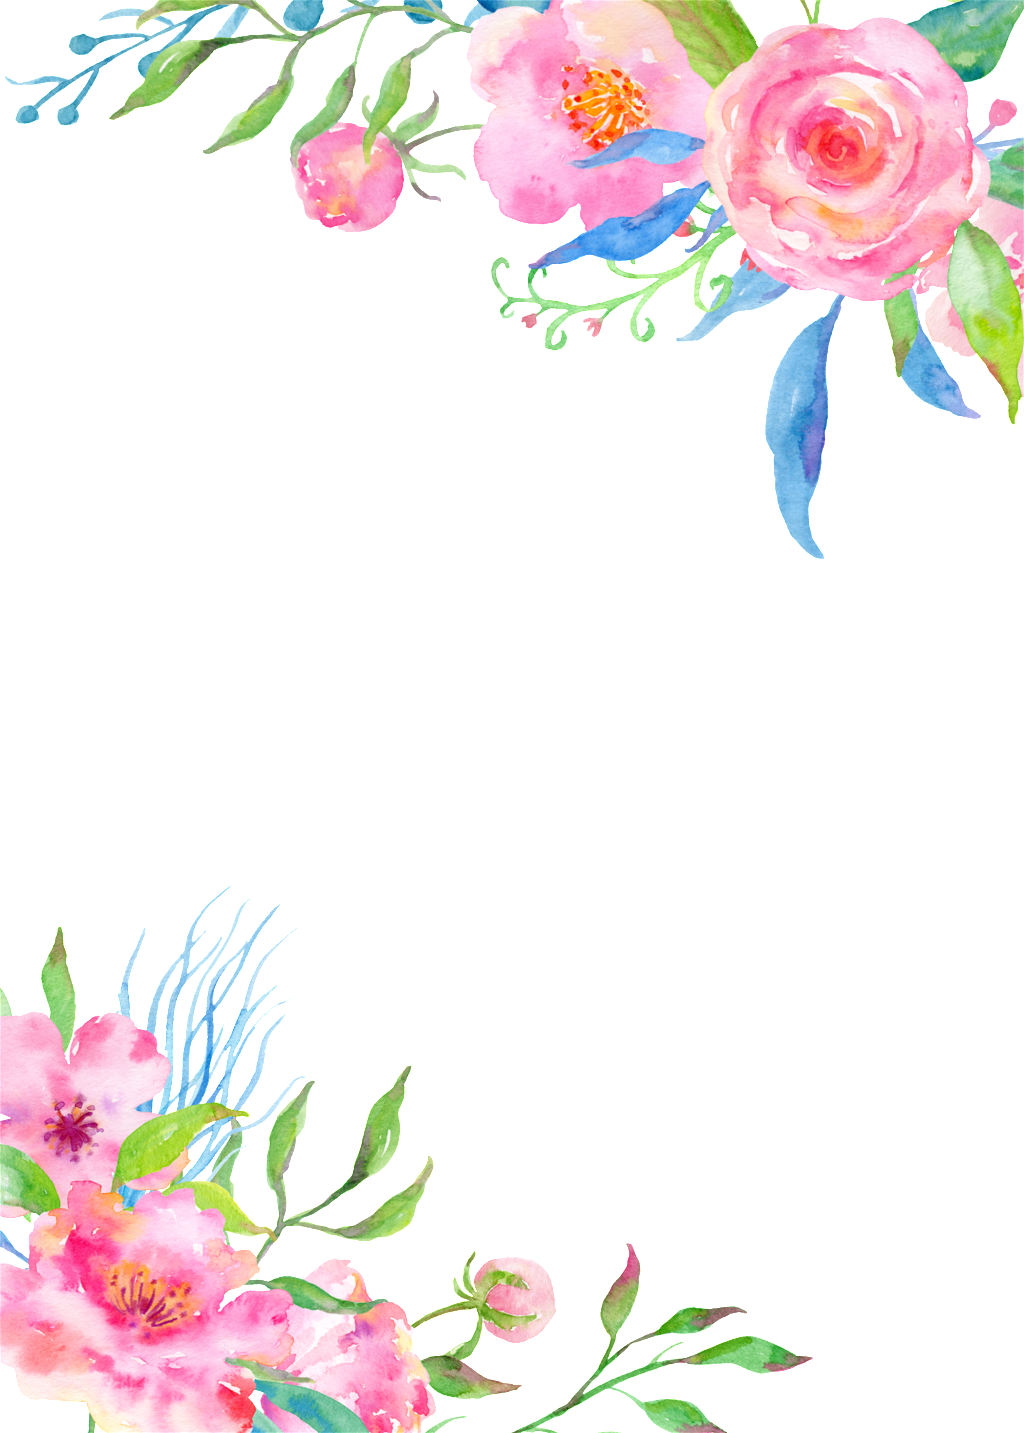 like this, style, flower PNG images for editing